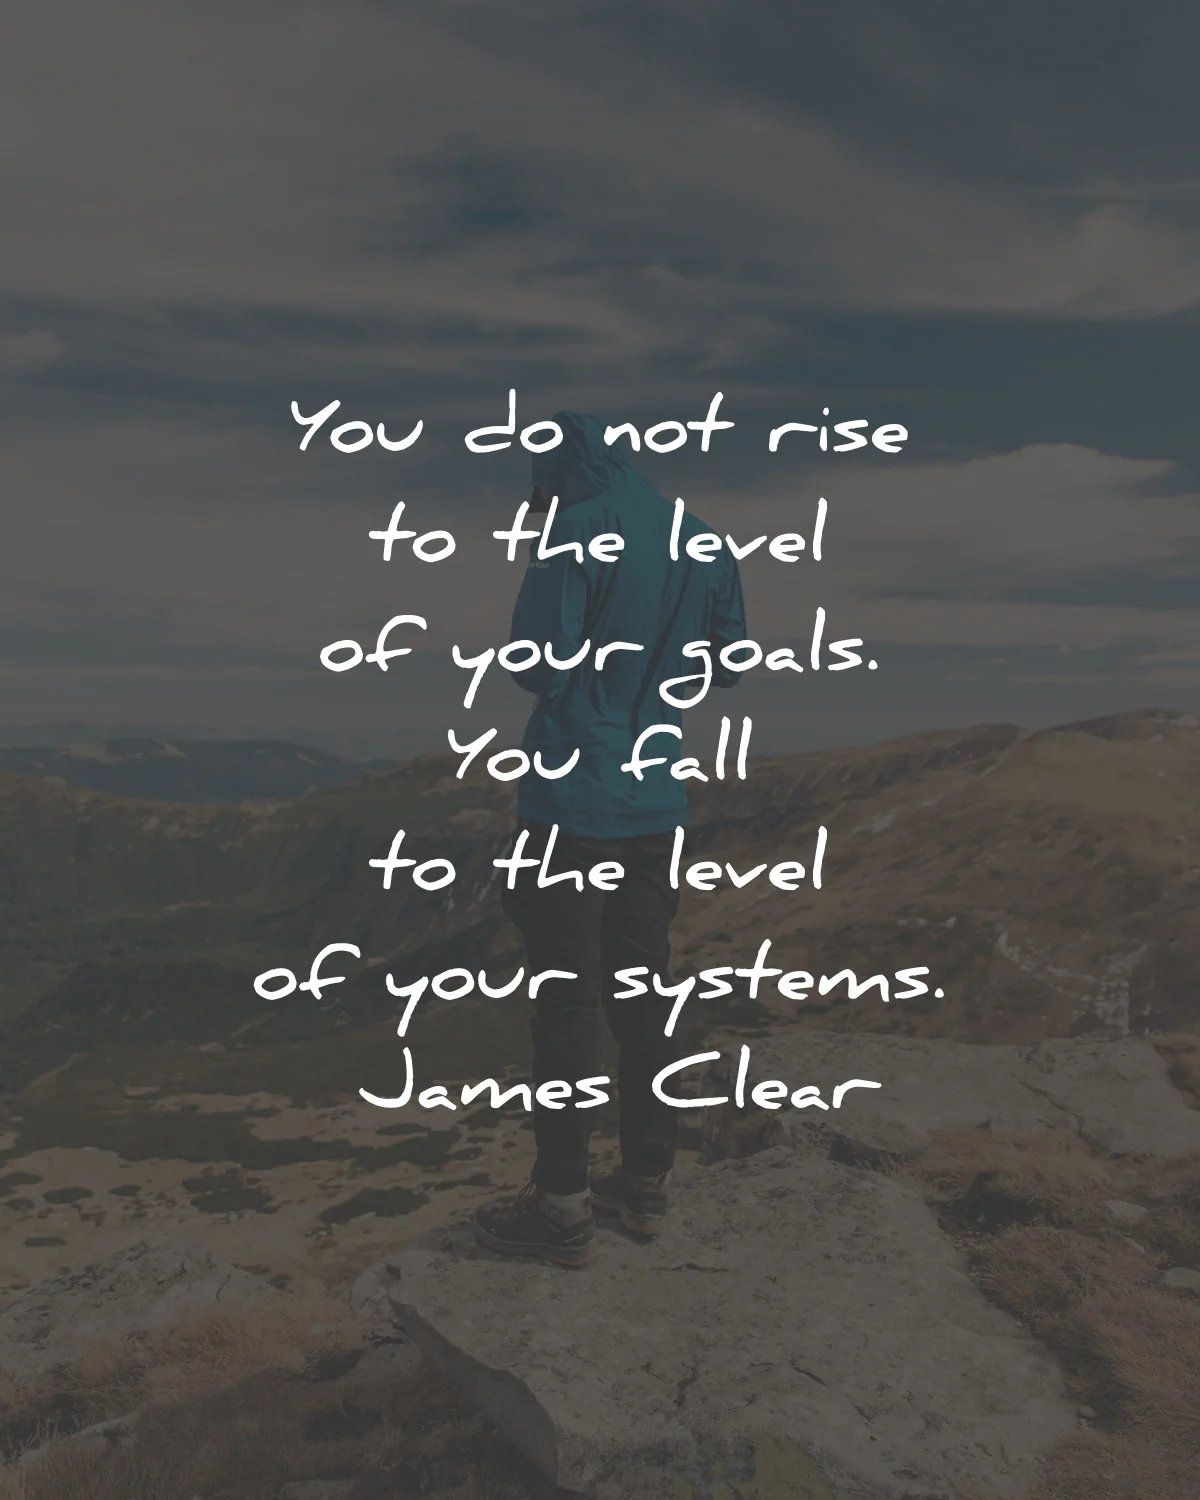 atomic habits quotes james clear rise level goals fall systems wisdom